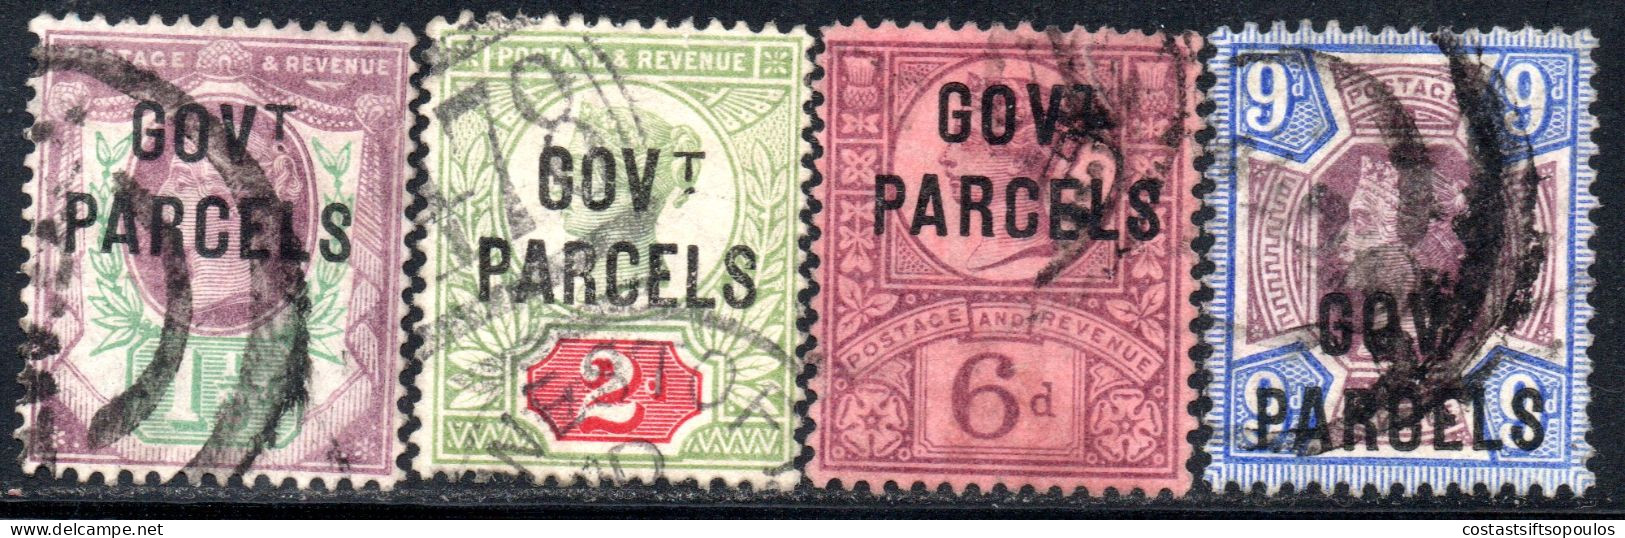 3075. 1887-1900 4 GOVERNMENT PARCELS STAMPS LOT. - Officials